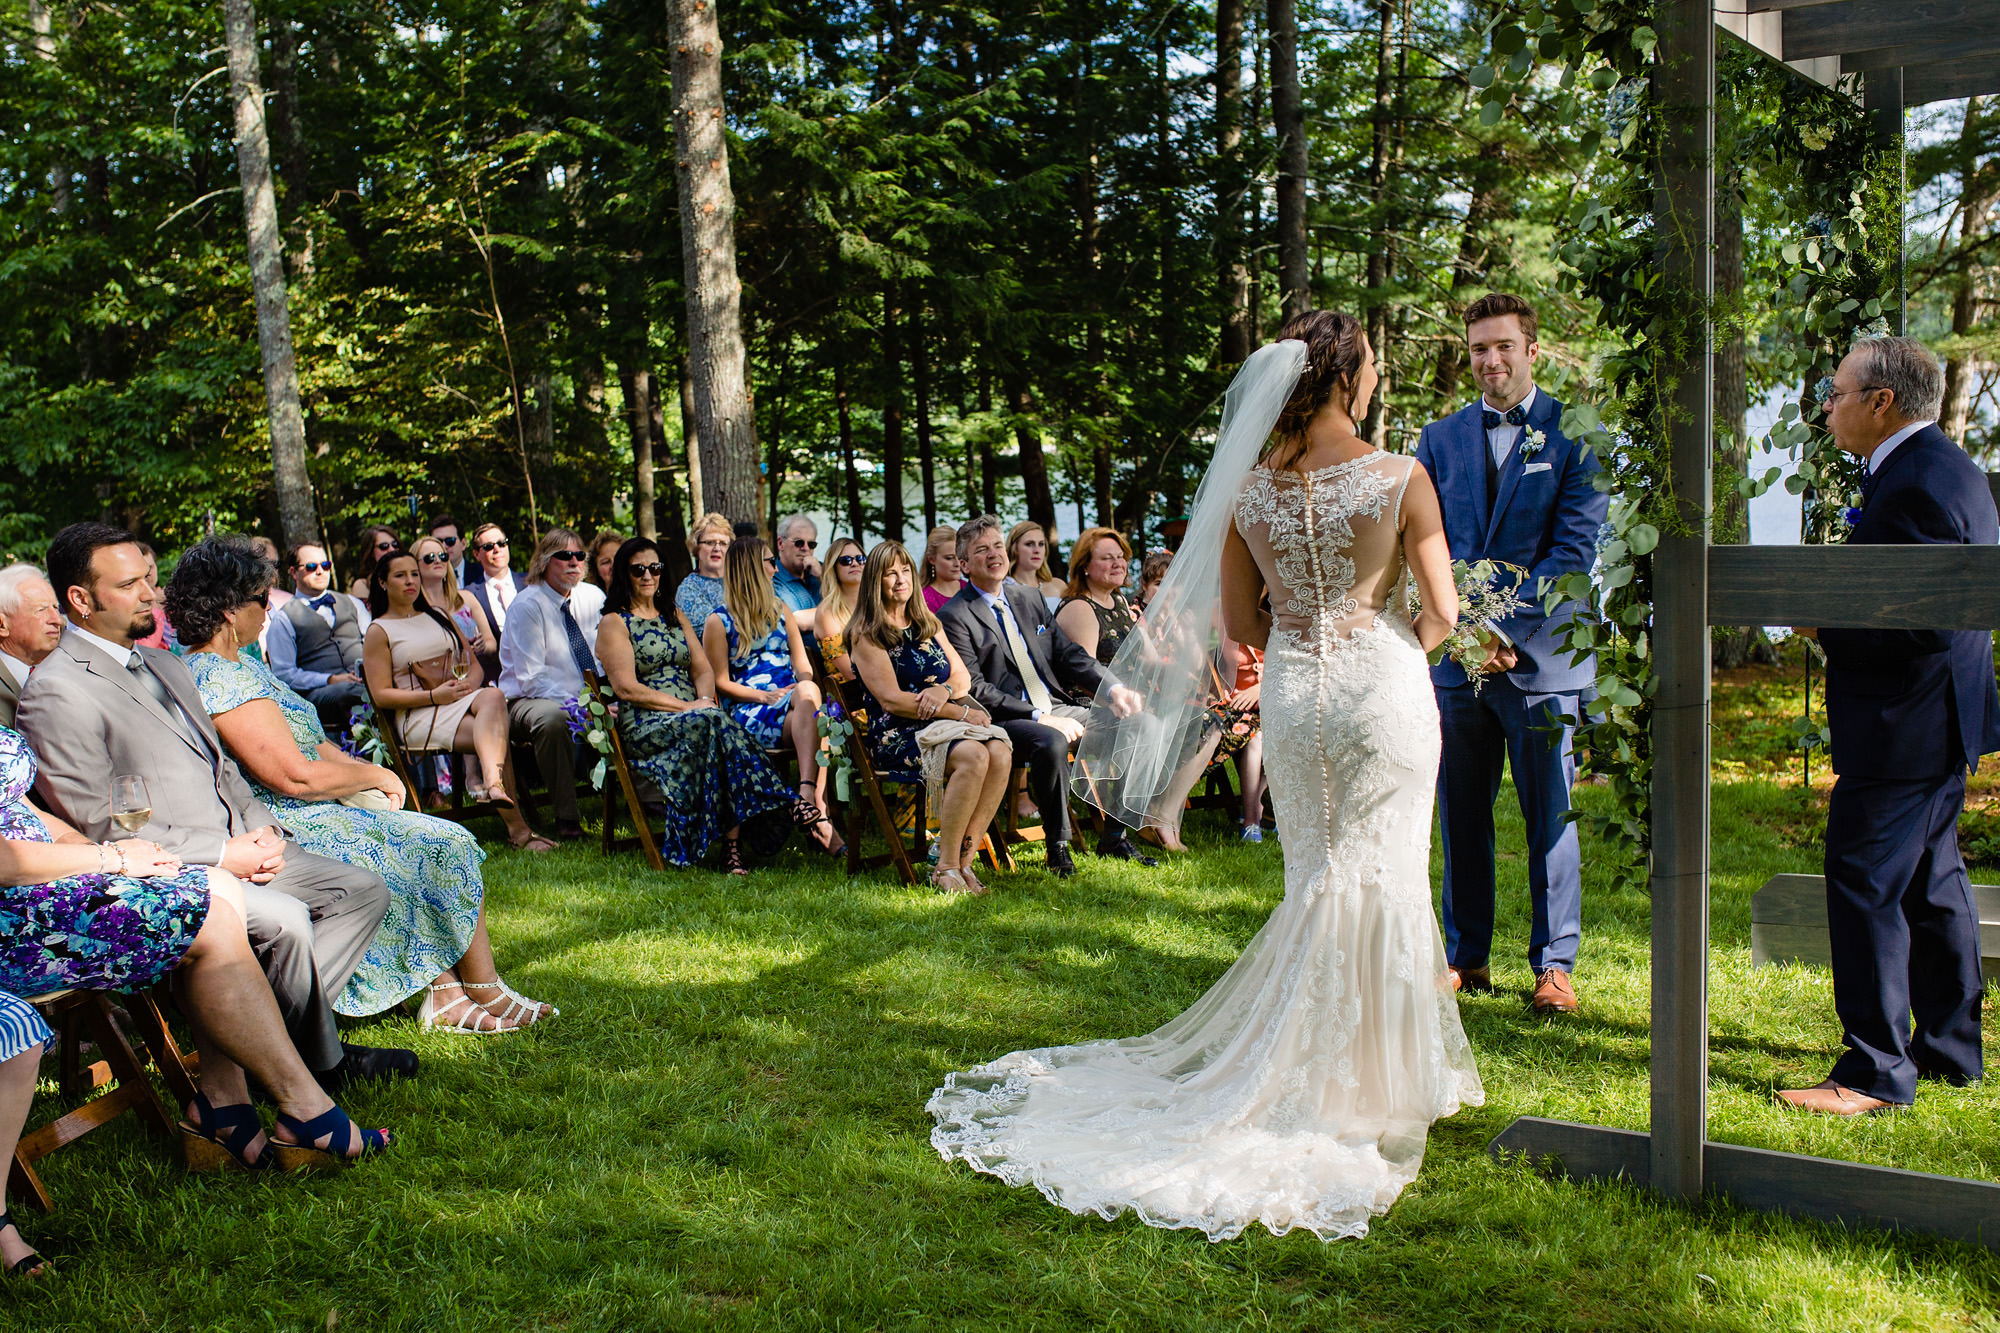 A beautiful lakeside wedding ceremony in Manchester Maine